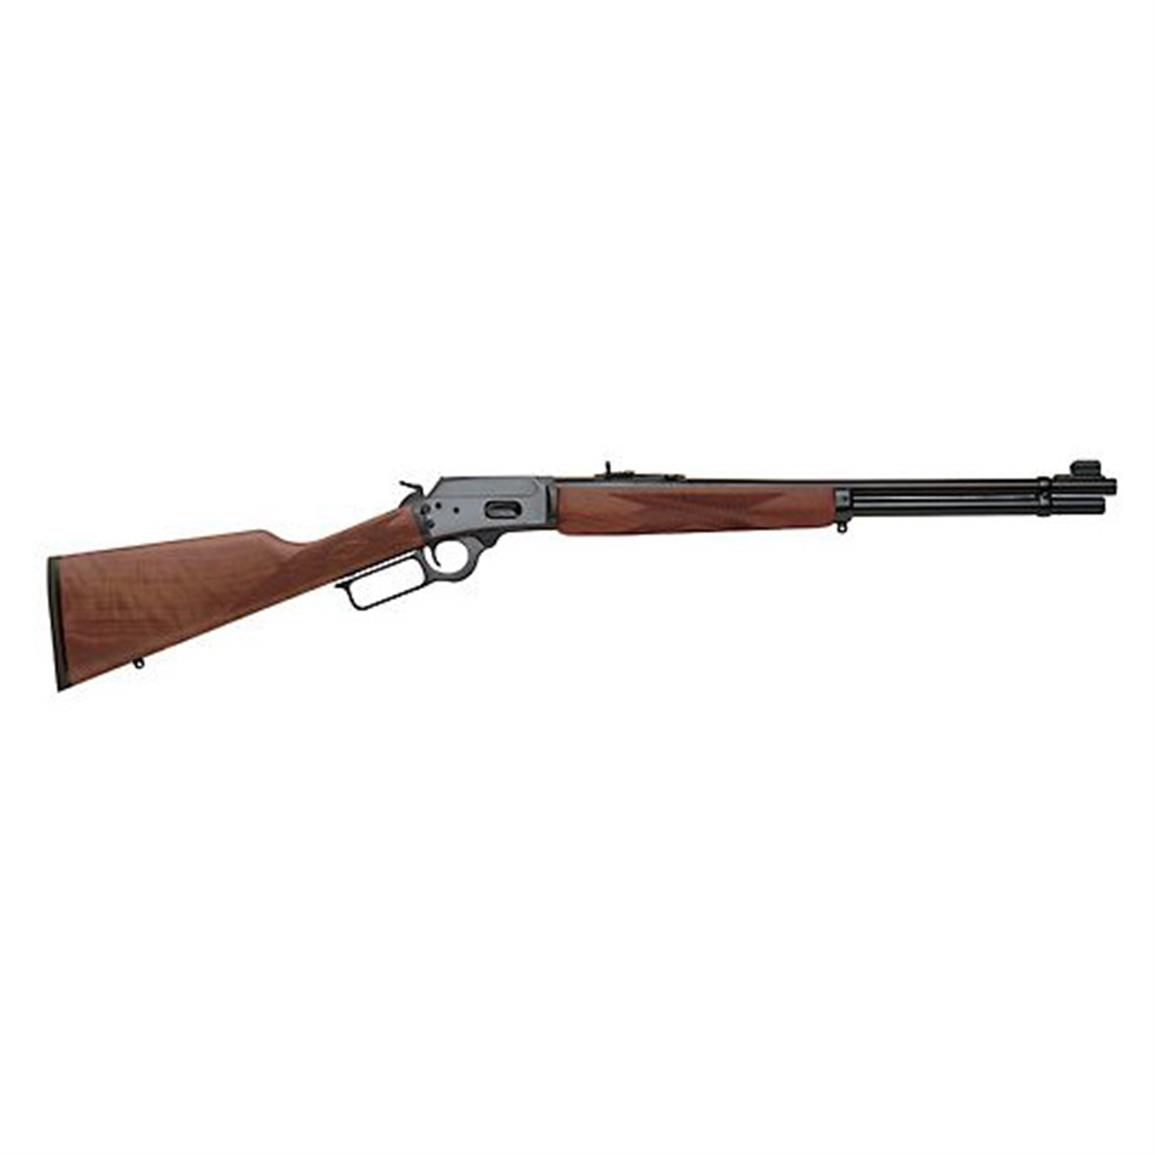 Marlin 1894, Lever Action, .44 Magnum/.44 Special, 20" Barrel, 10 Rounds